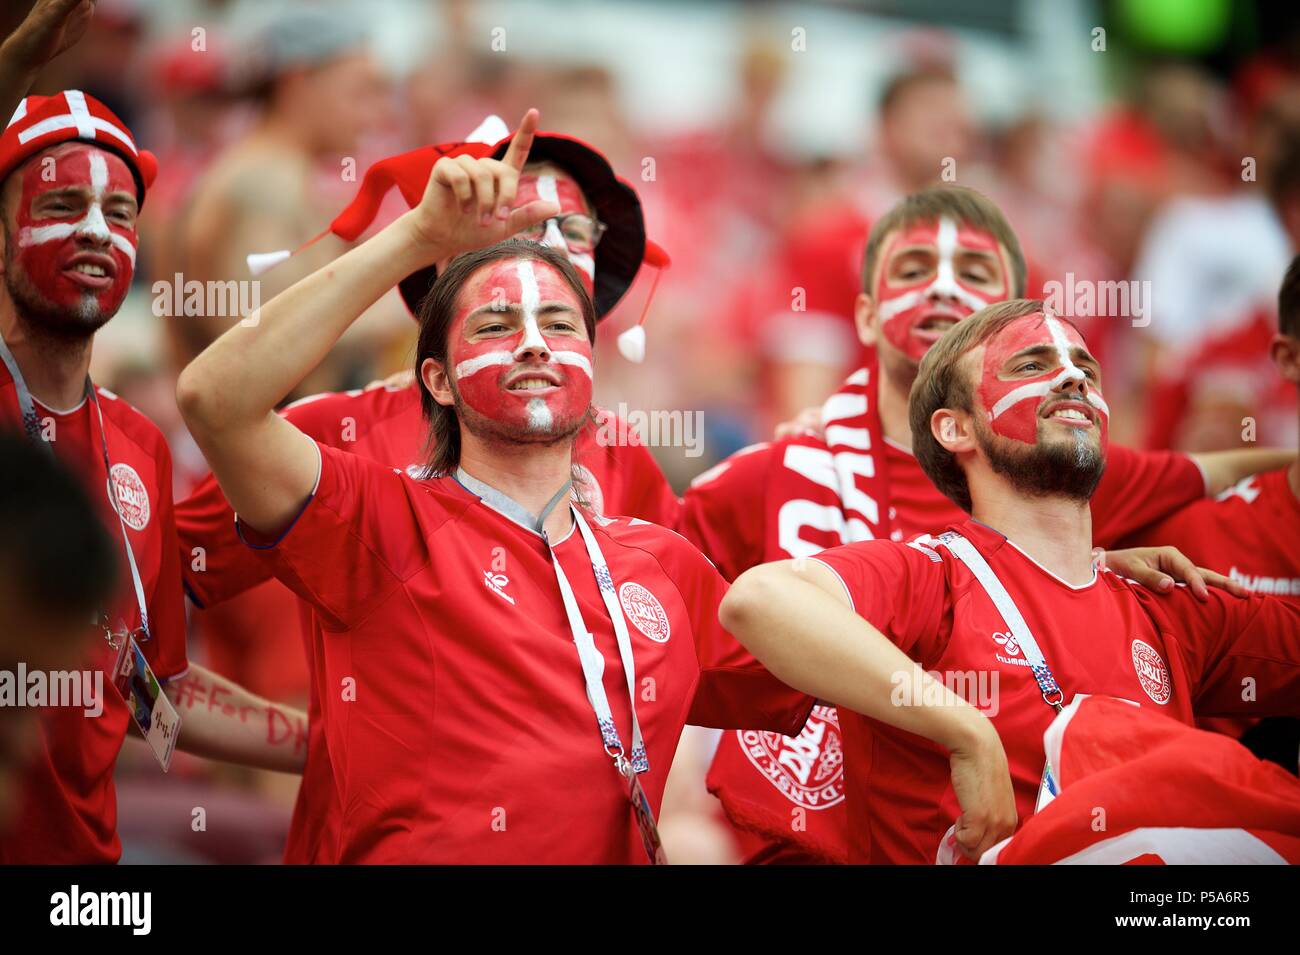 Jun 26th, 2018, Moscow, Russia. Football fans during 2018 FIFA World Cup Russia Group C match France v Denmark at Luzhniki  stadium, Moscow. Shoja Lak/Alamy Live News. Stock Photo